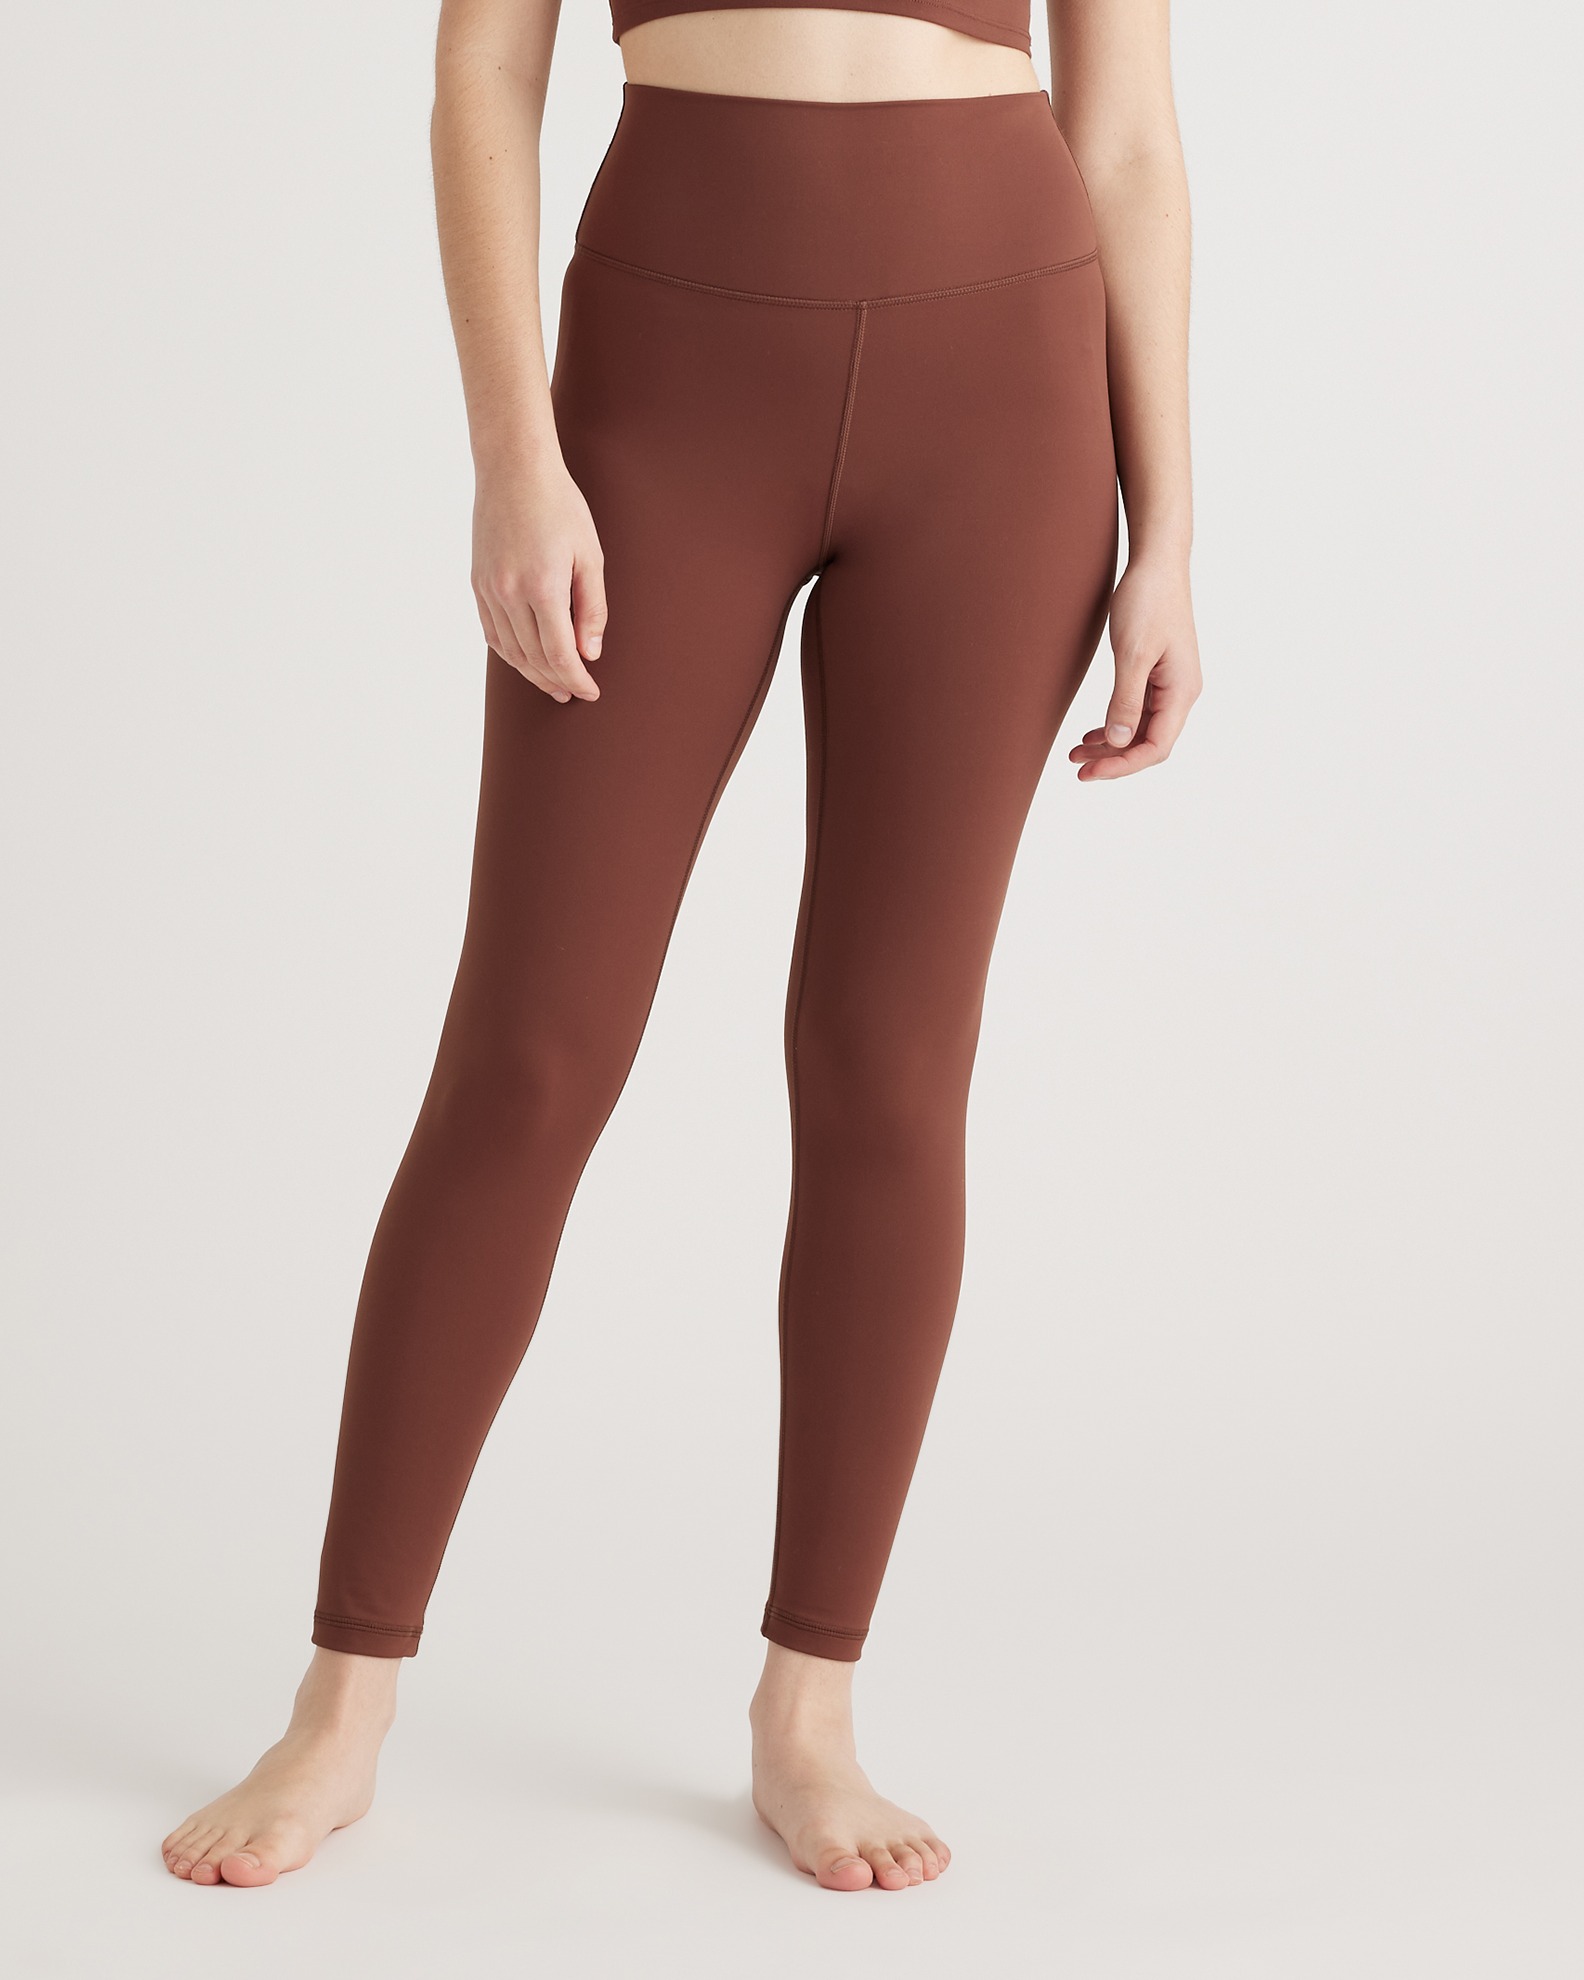 Quince Women's Ultra-form High-rise Legging In Chocolate